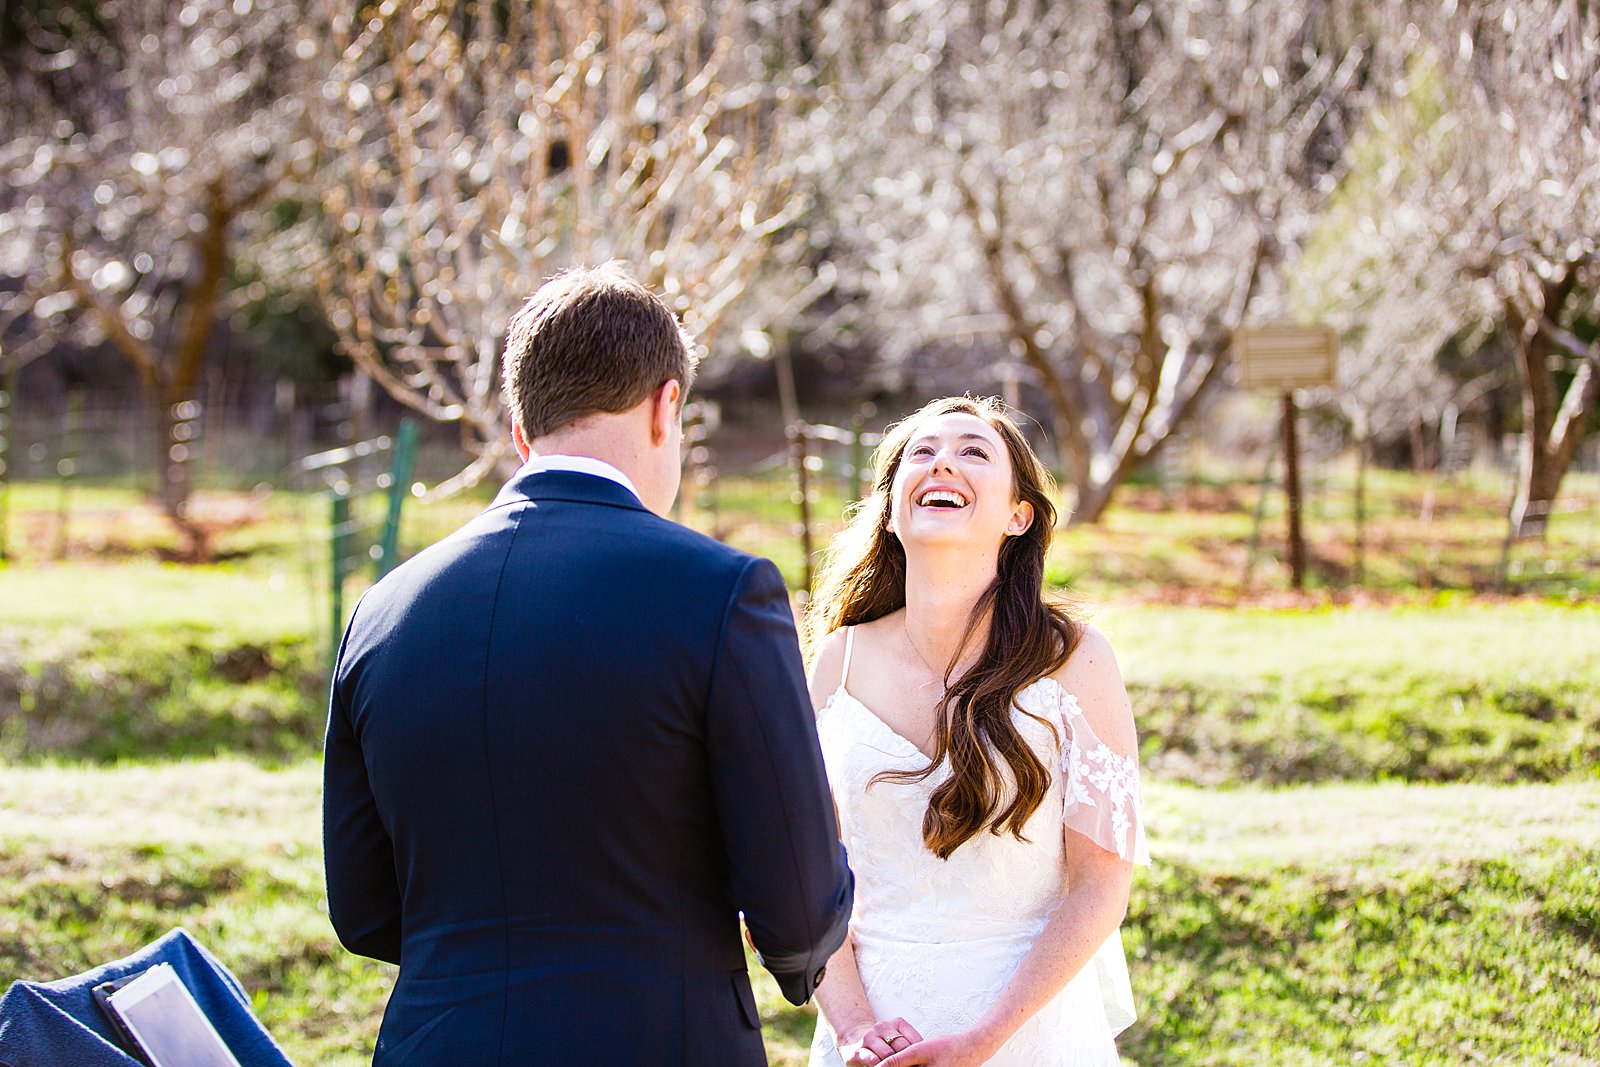 Bride laughing with her groom during their wedding ceremony at Slide Rock by Sedona elopement photographer PMA Photography.